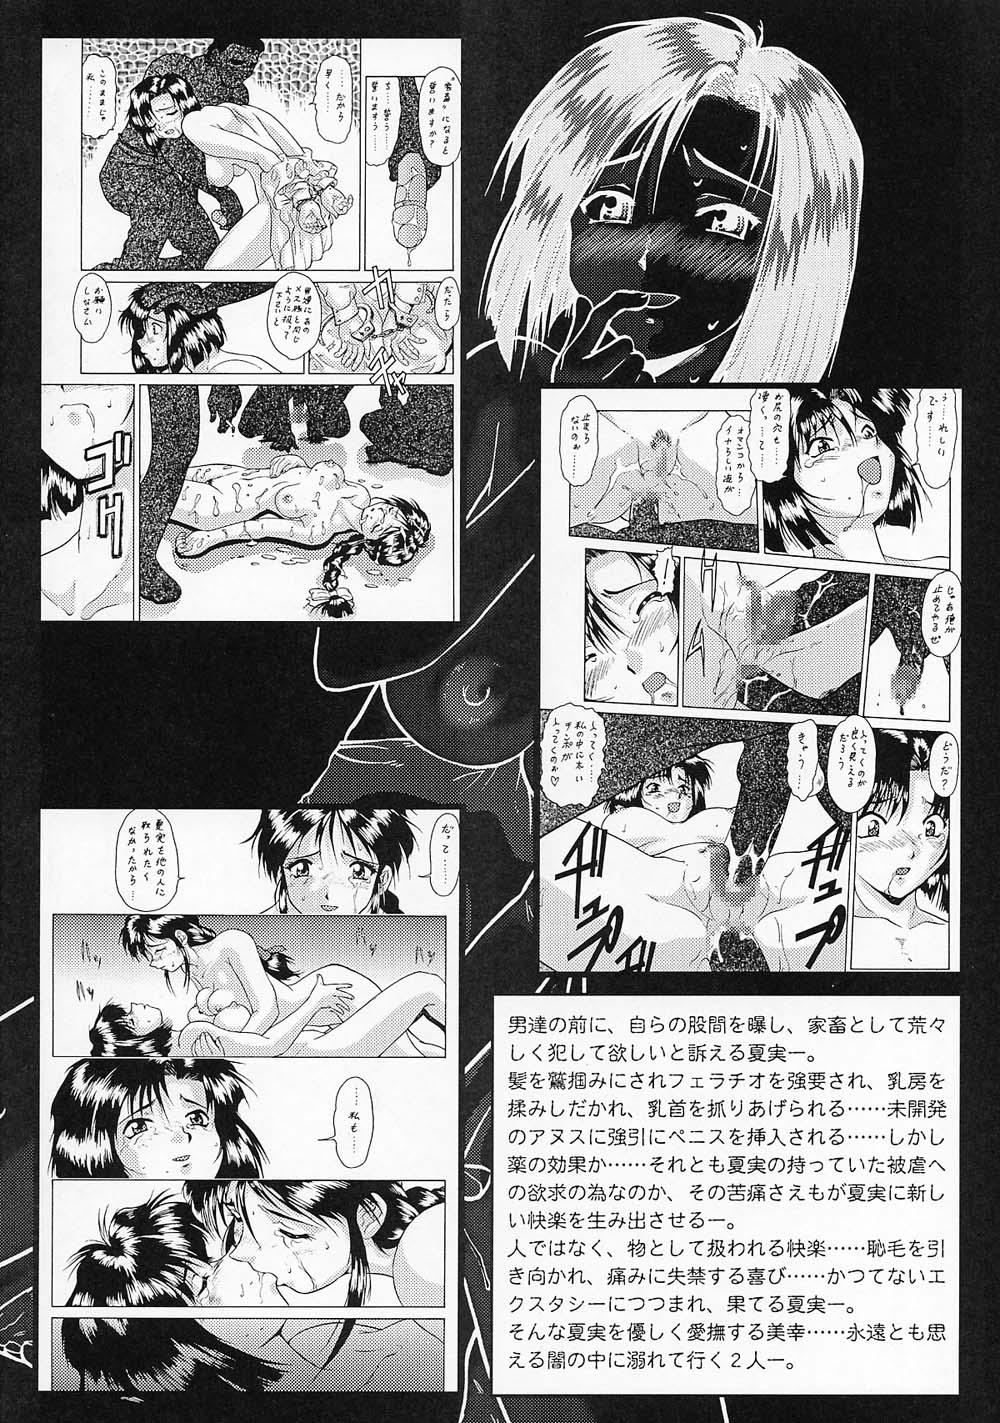 Unshaved Taiho Shichauzo The Doujin Vol. 3 - Youre under arrest Gym - Page 8